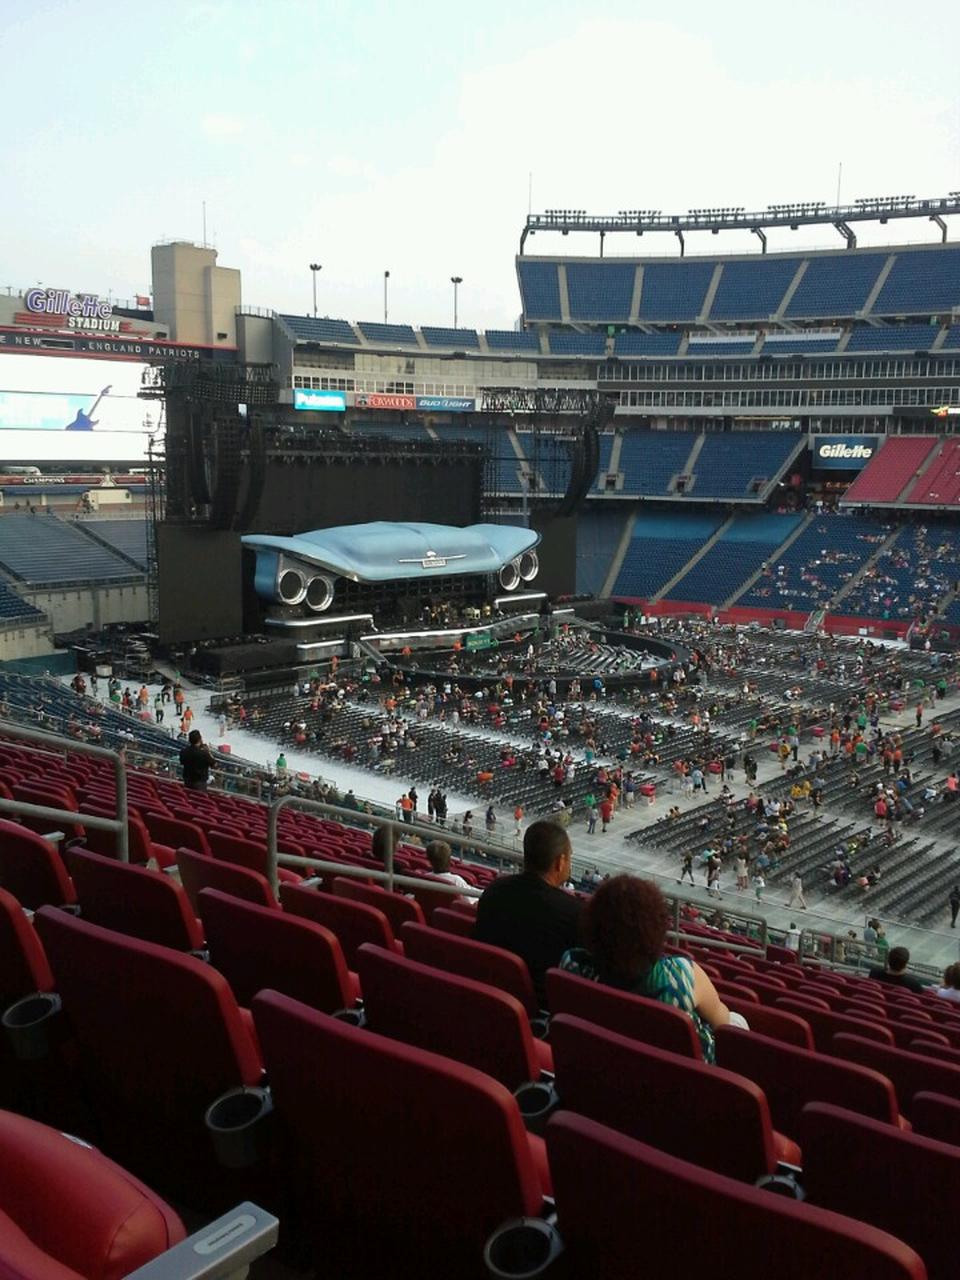 section cl7, row 21 seat view  for concert - gillette stadium